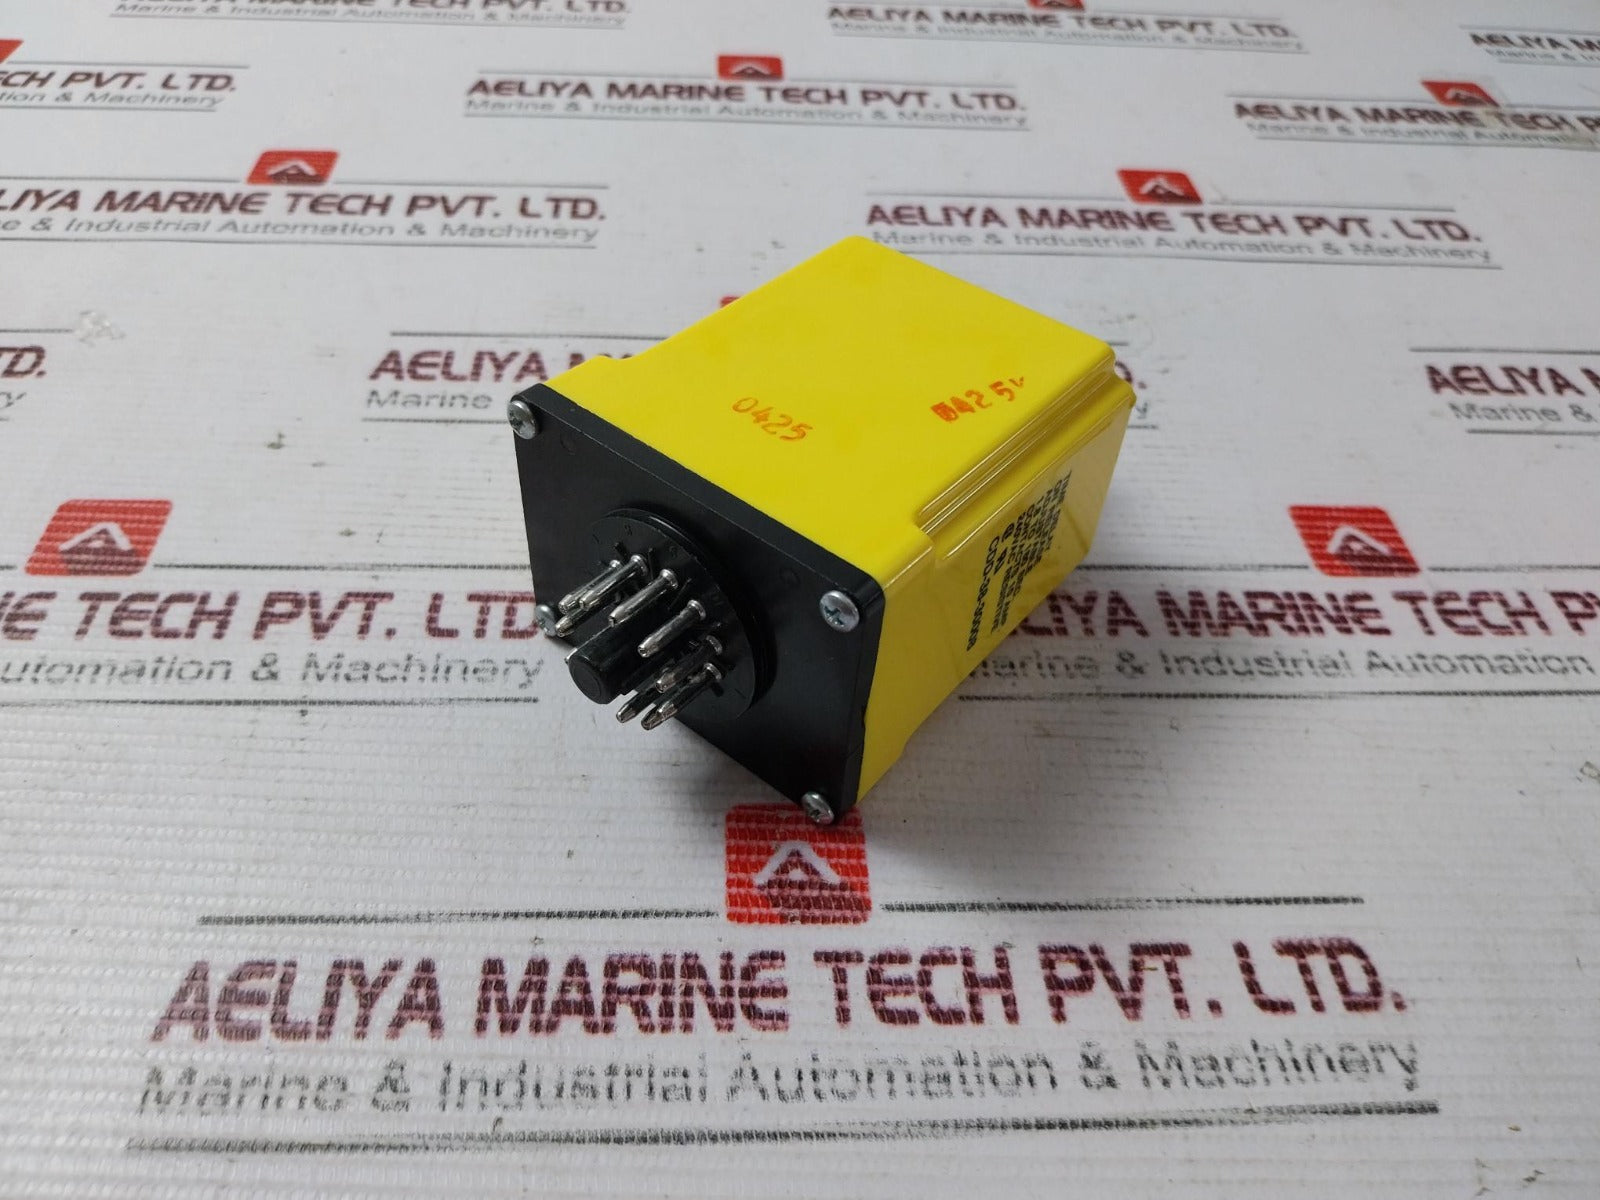 Tyco Potter & Brumfield Cdd-38-30008 Time Delay Relay 1.8 To 180 Sec